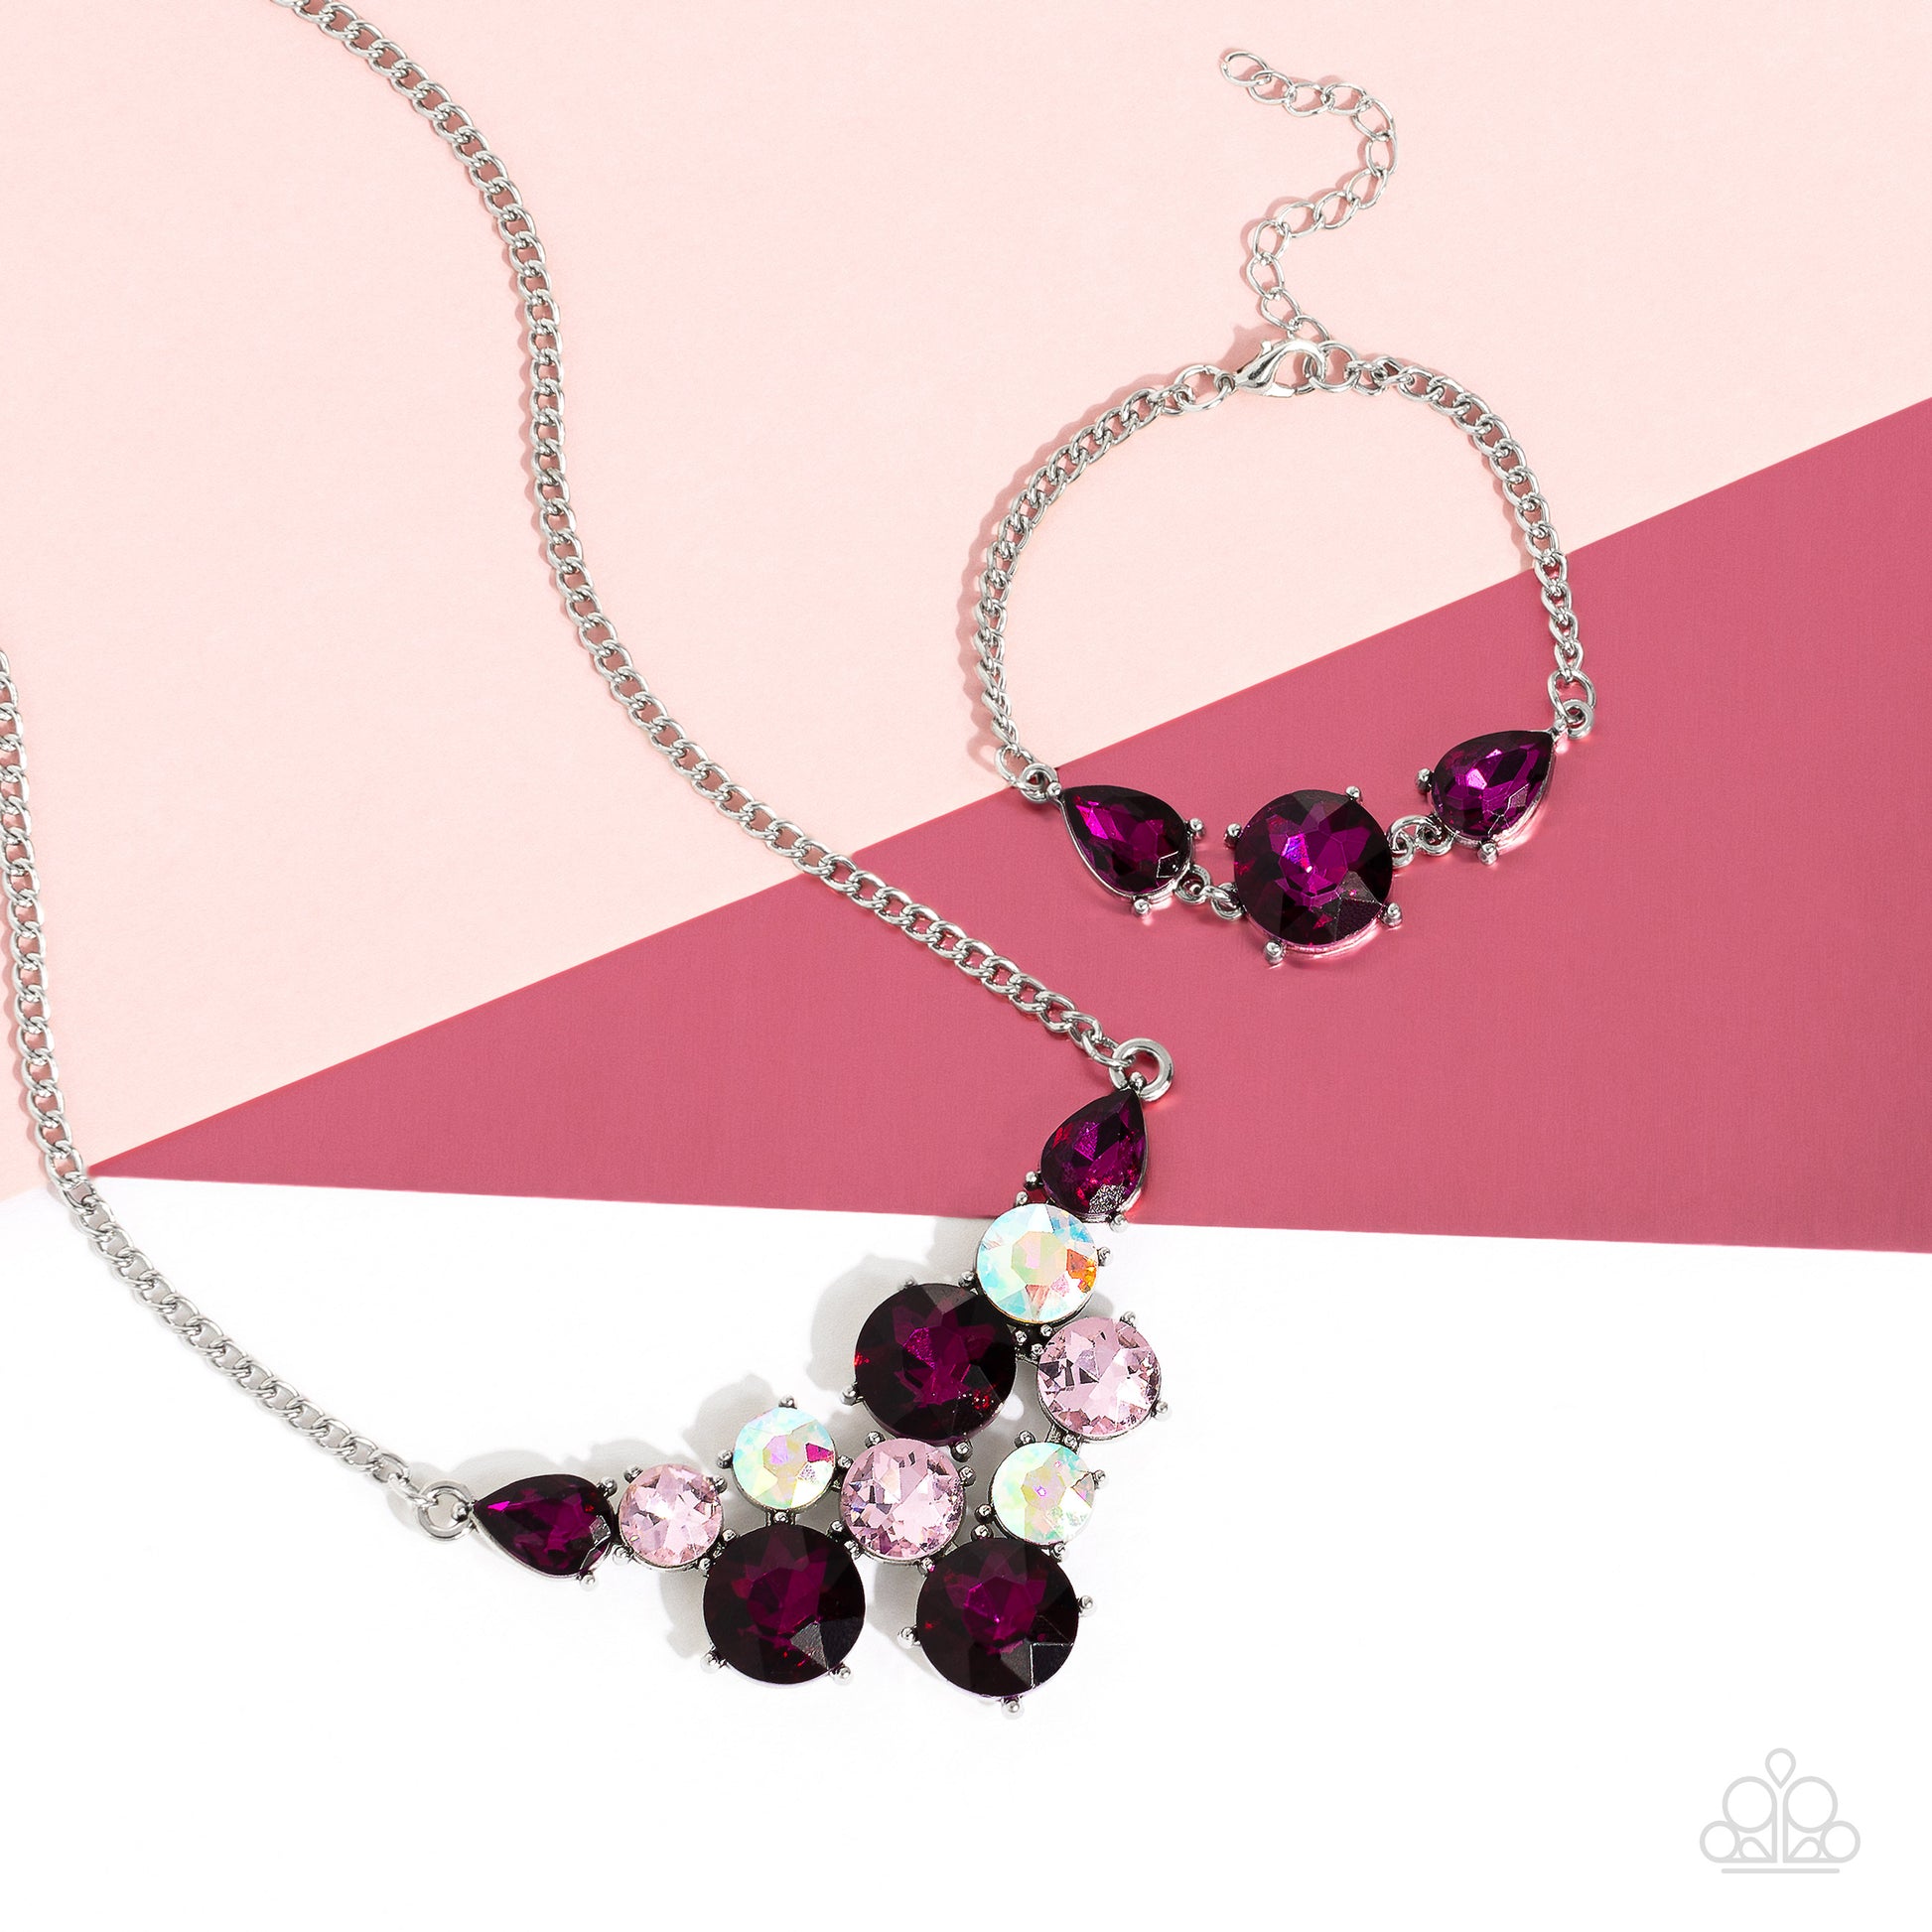 Paparazzi Accessories Twinkling Trio - Pink An oversized round gem bordered by teardrop gems cluster together to create a glittery silver collection around the wrist. Featured in a fuchsia hue, each gem reflects light off of its faceted surface emitting f